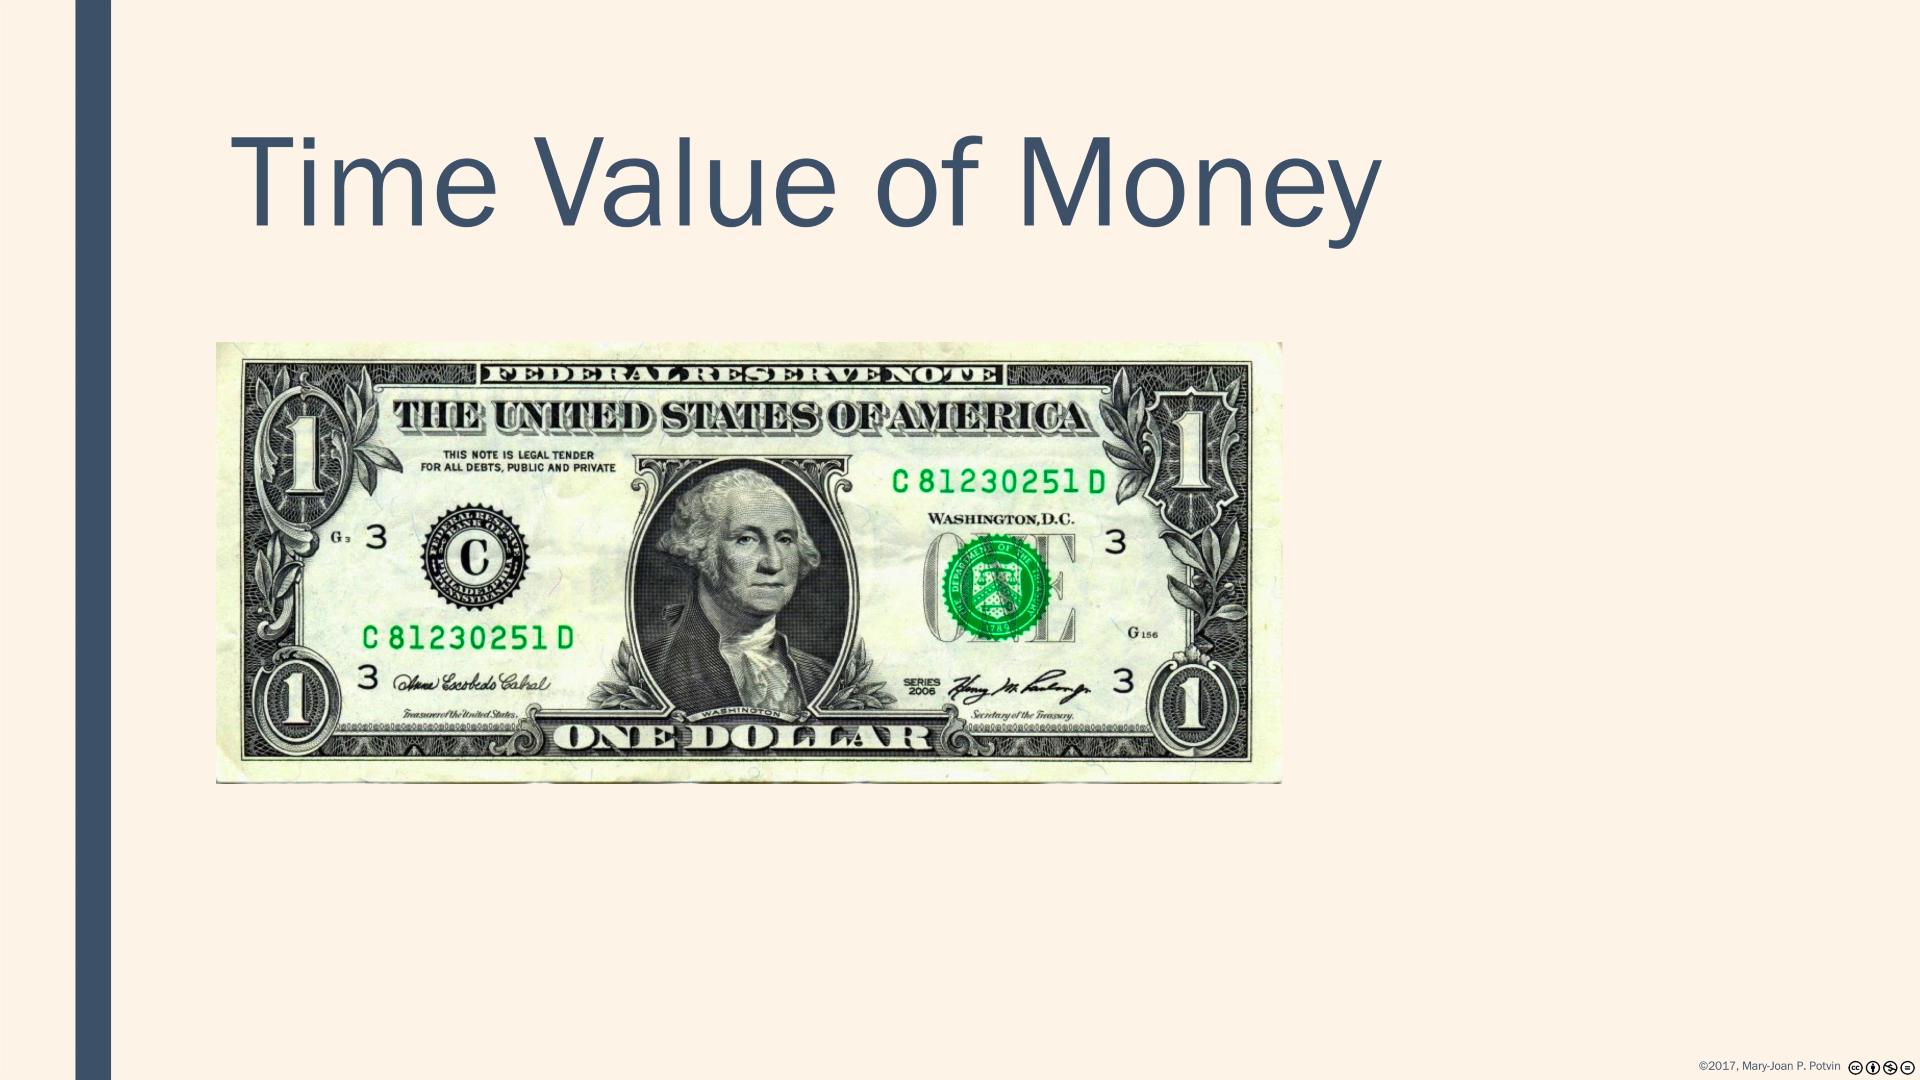 Time Value of Money Overview